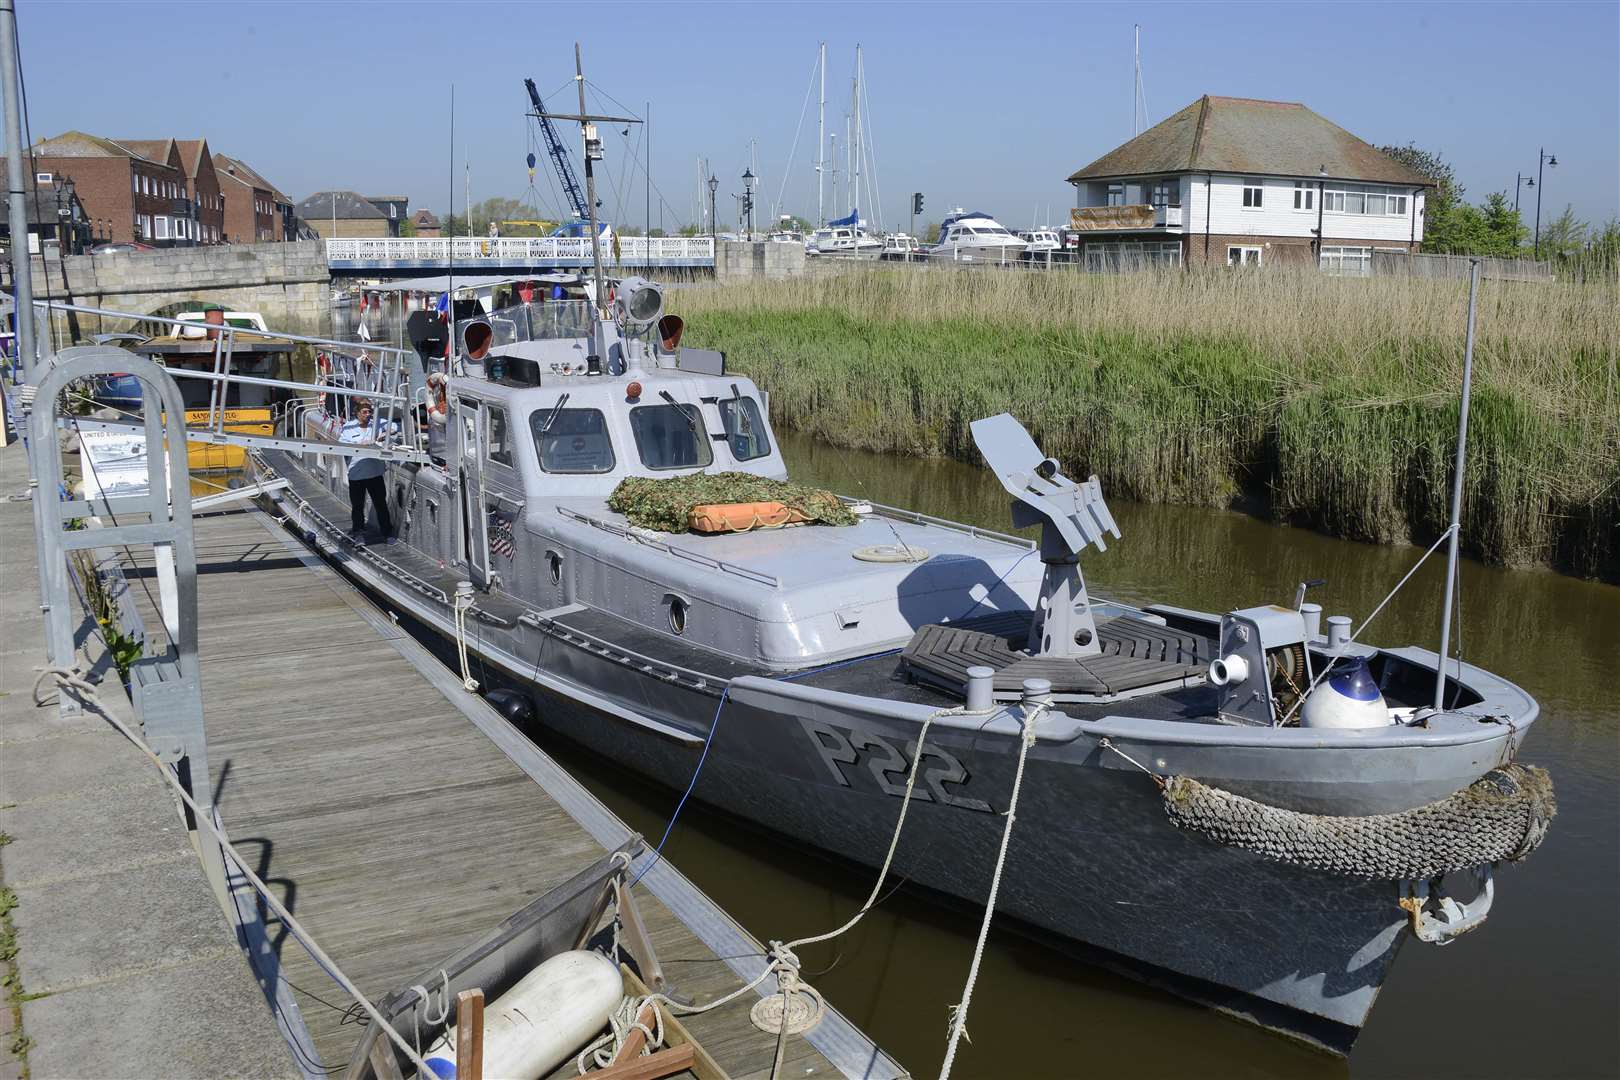 The P22 Gunboat has been moored on the Quay in Sandwich since 2017 Picture: Paul Amos